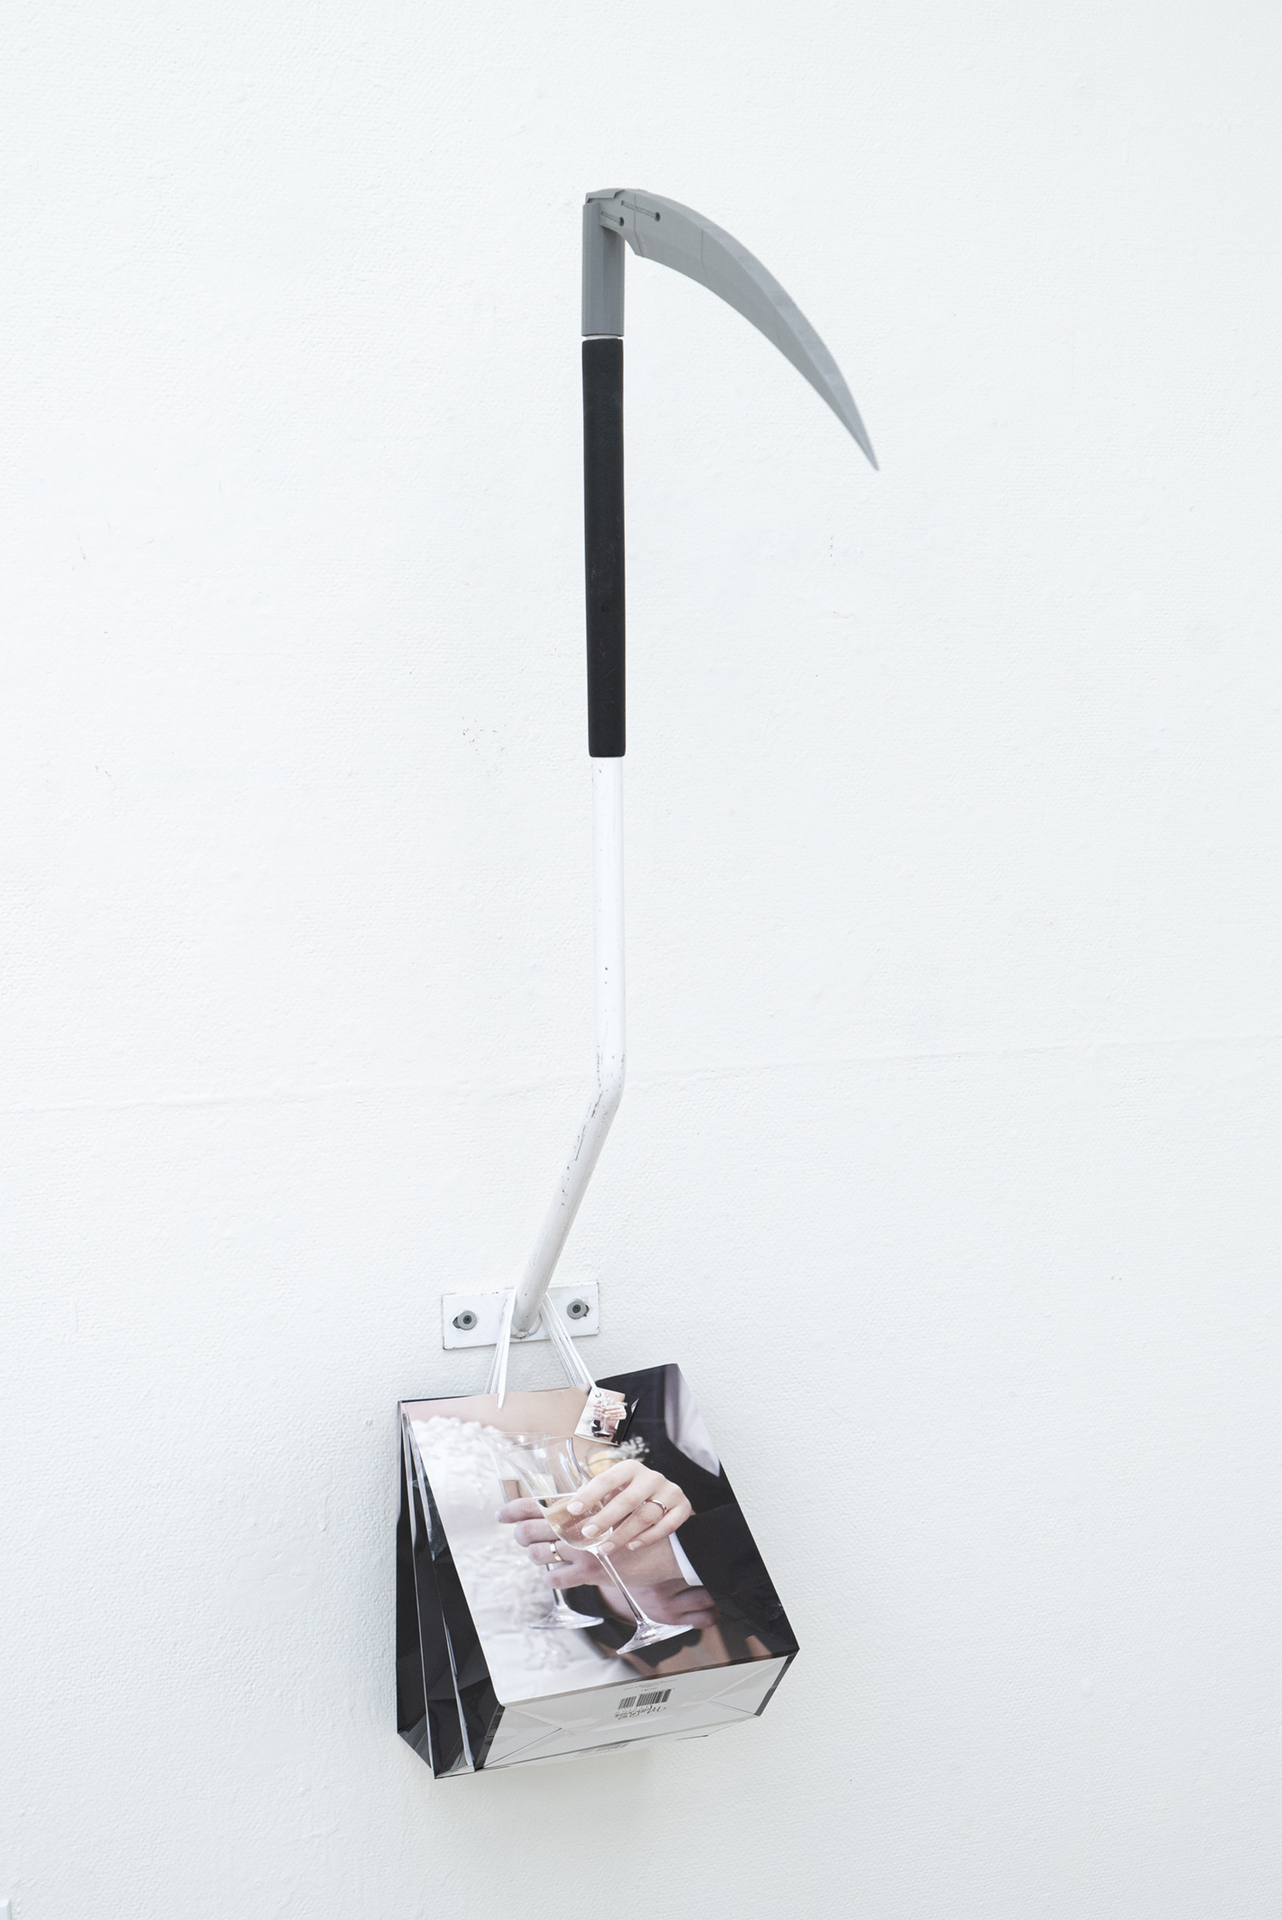 Graham Wiebe, A Small Wedding, 2020, gift bags, exercise machine fragment, 3D printed scythe, 48 x 11 x 32 in